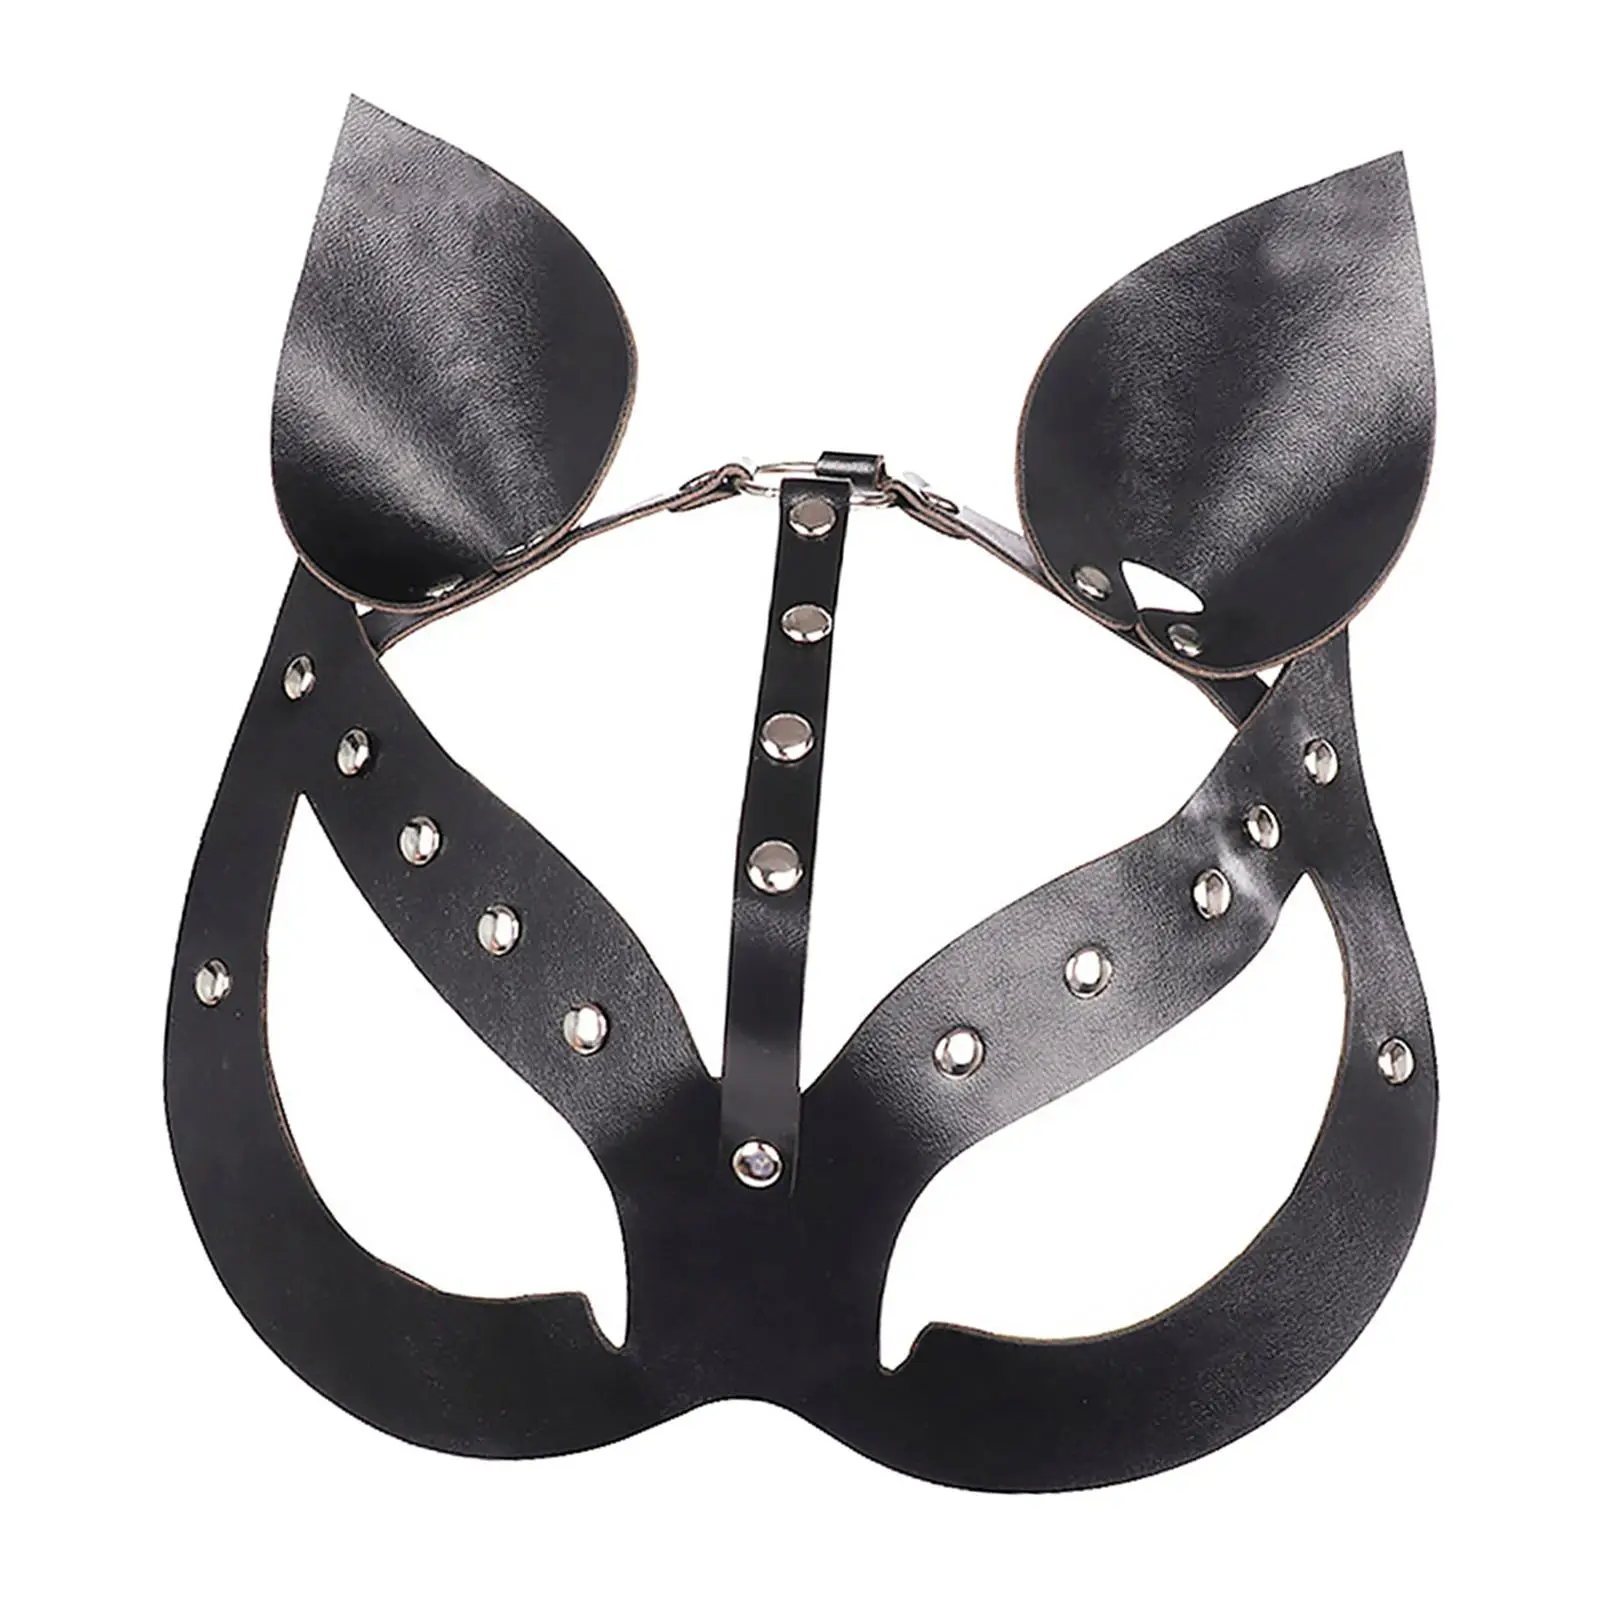 Masquerade Mask, Half Face Cat Leather Mask, Cat Mask Rivet, Kitten Leather Mask for Halloween Easter Masquerade Accessories